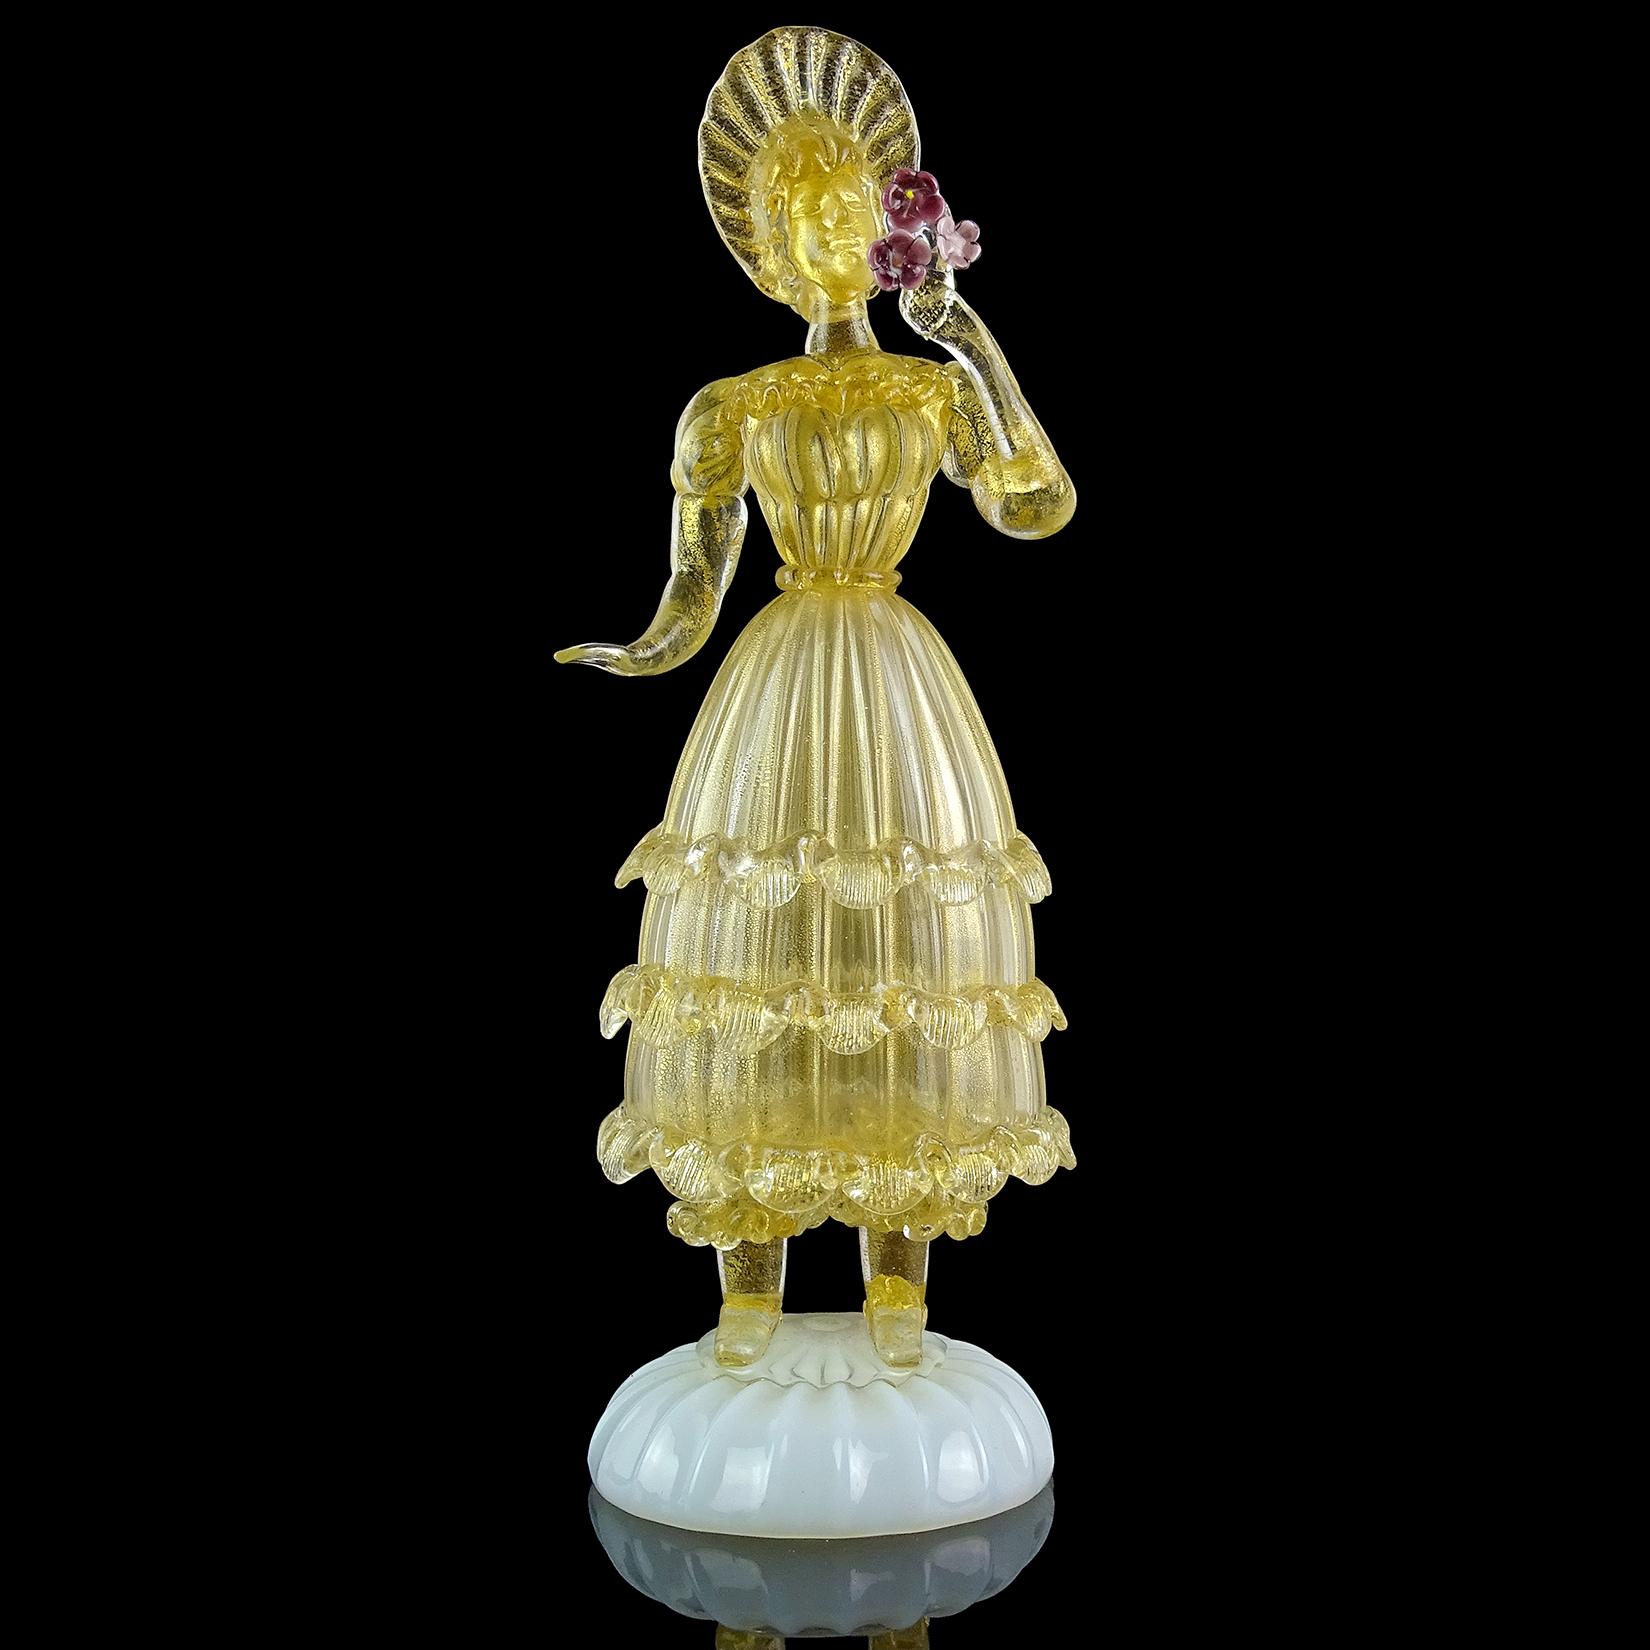 Gorgeous large vintage Murano hand blown gold flecks on opal base Italian art glass Queen Woman figure, holding purple flowers. She has a very ornate dress with lots of ruffles, and a golden head piece like a halo. Highly detailed face. She is